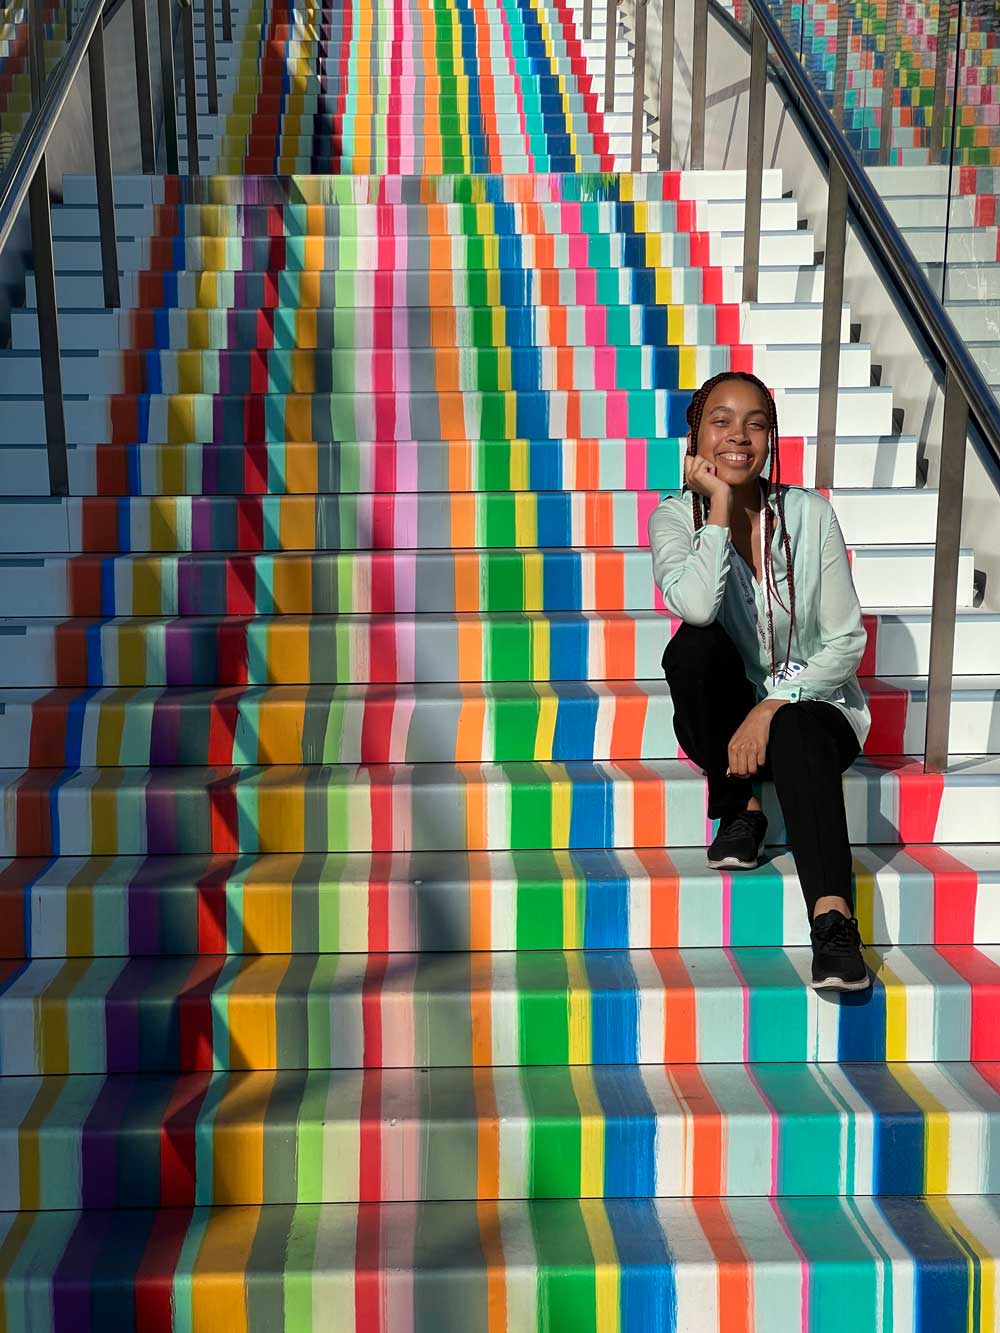 Kameron smiling and sitting on rainbow colored staircase